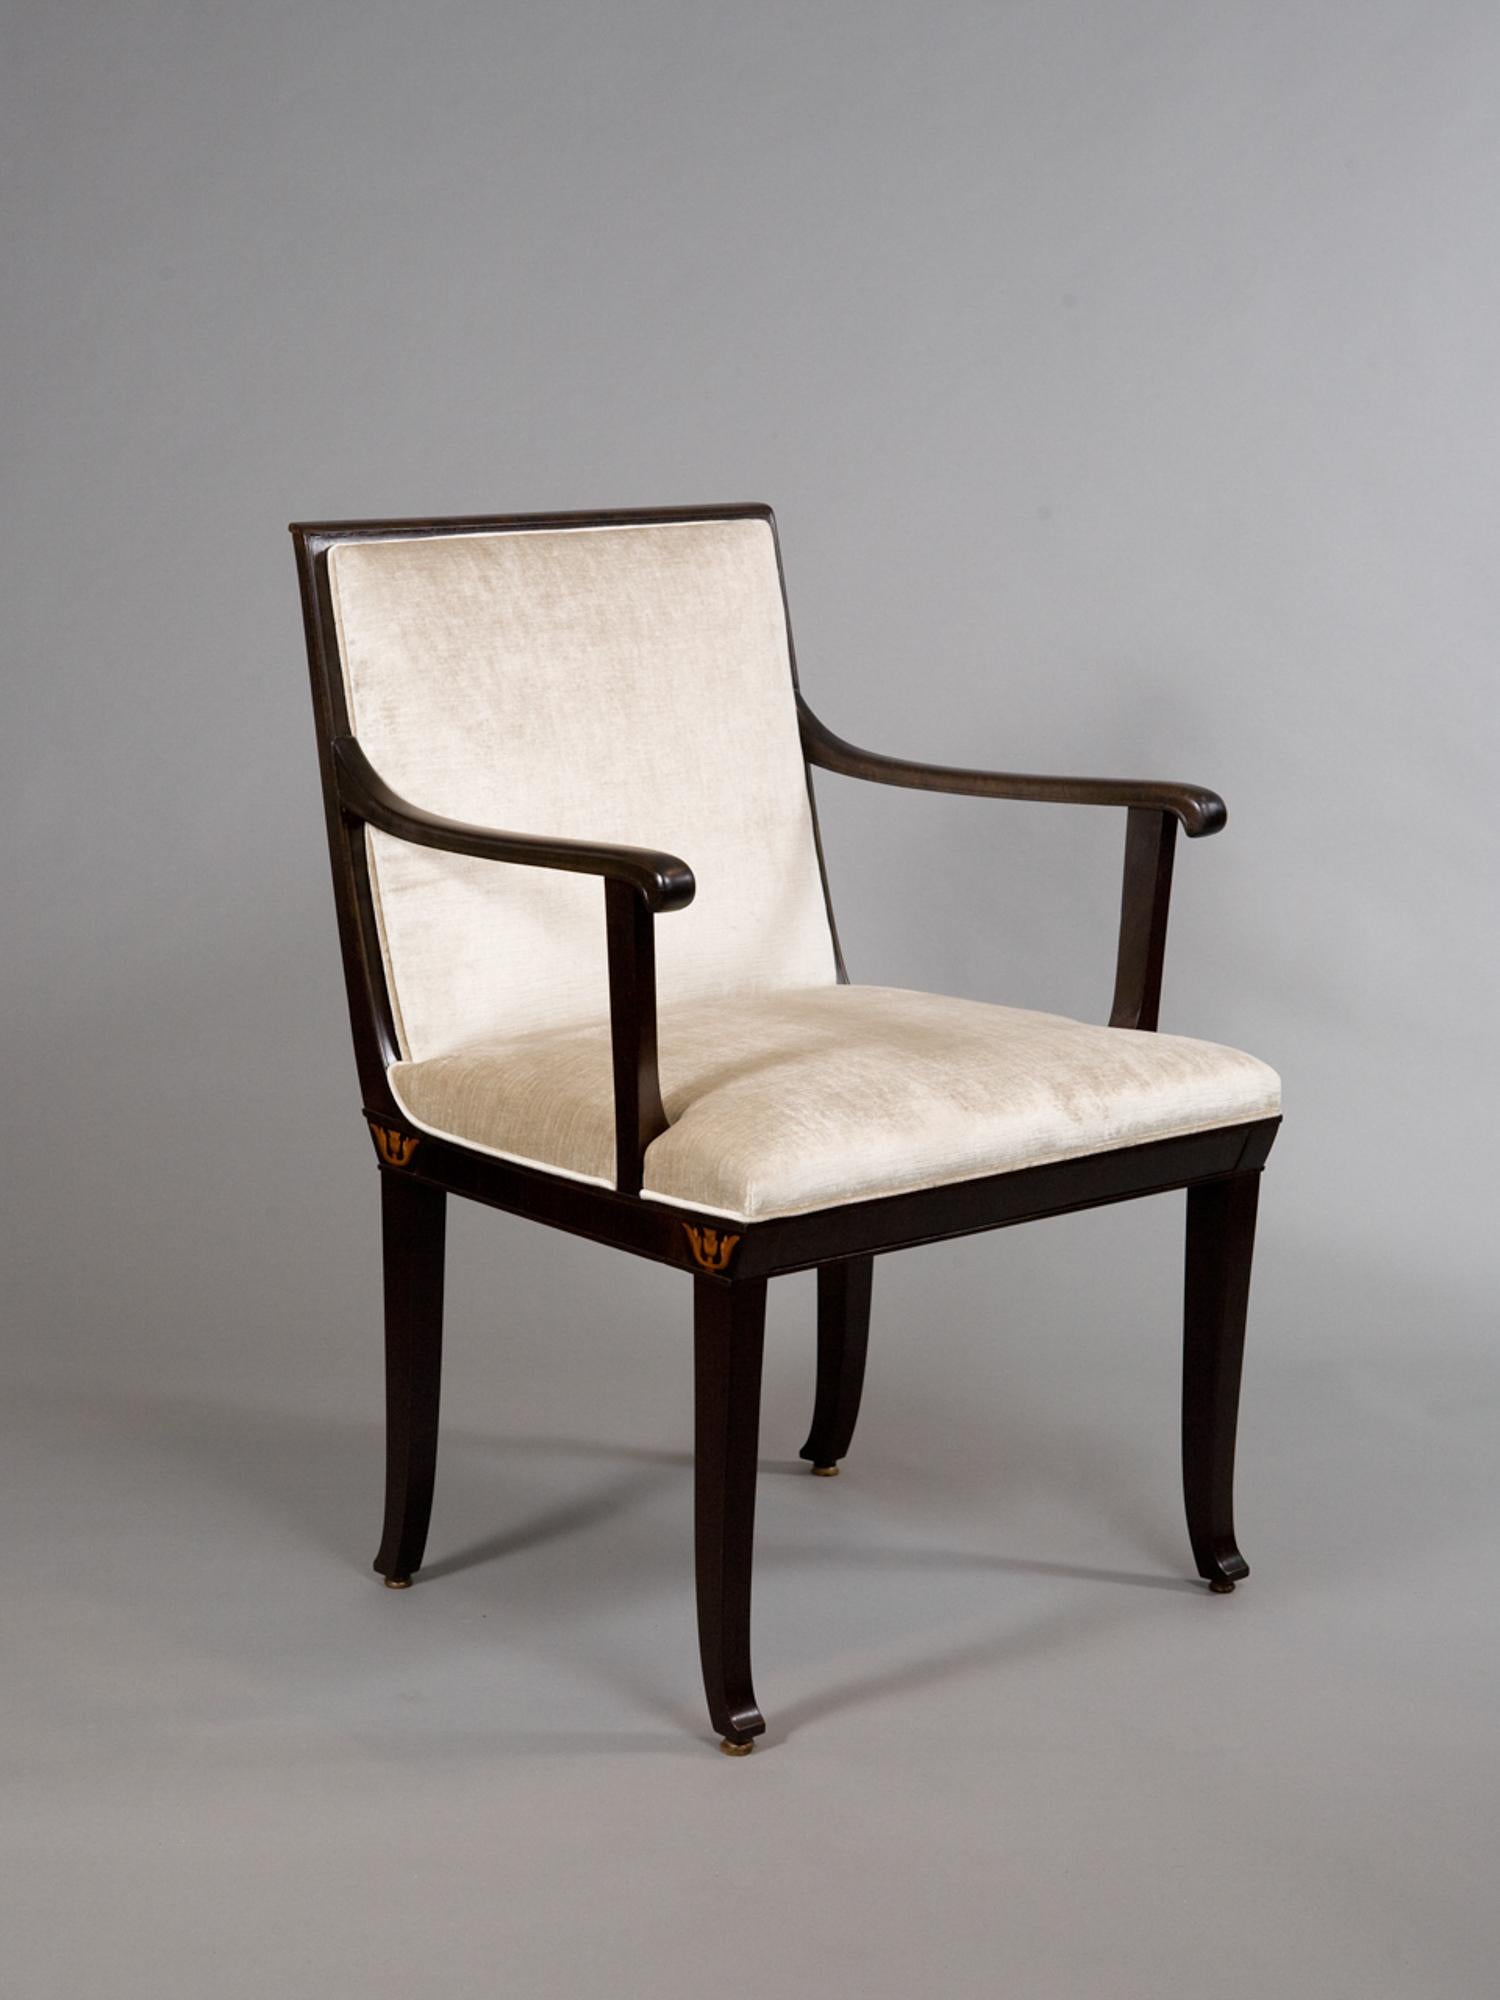 Pair of open armchairs with marquetry inlay accents designed by Carl Malmsten (1888-1972). Fully restored and newly upholstered. Seat depth - 17.5